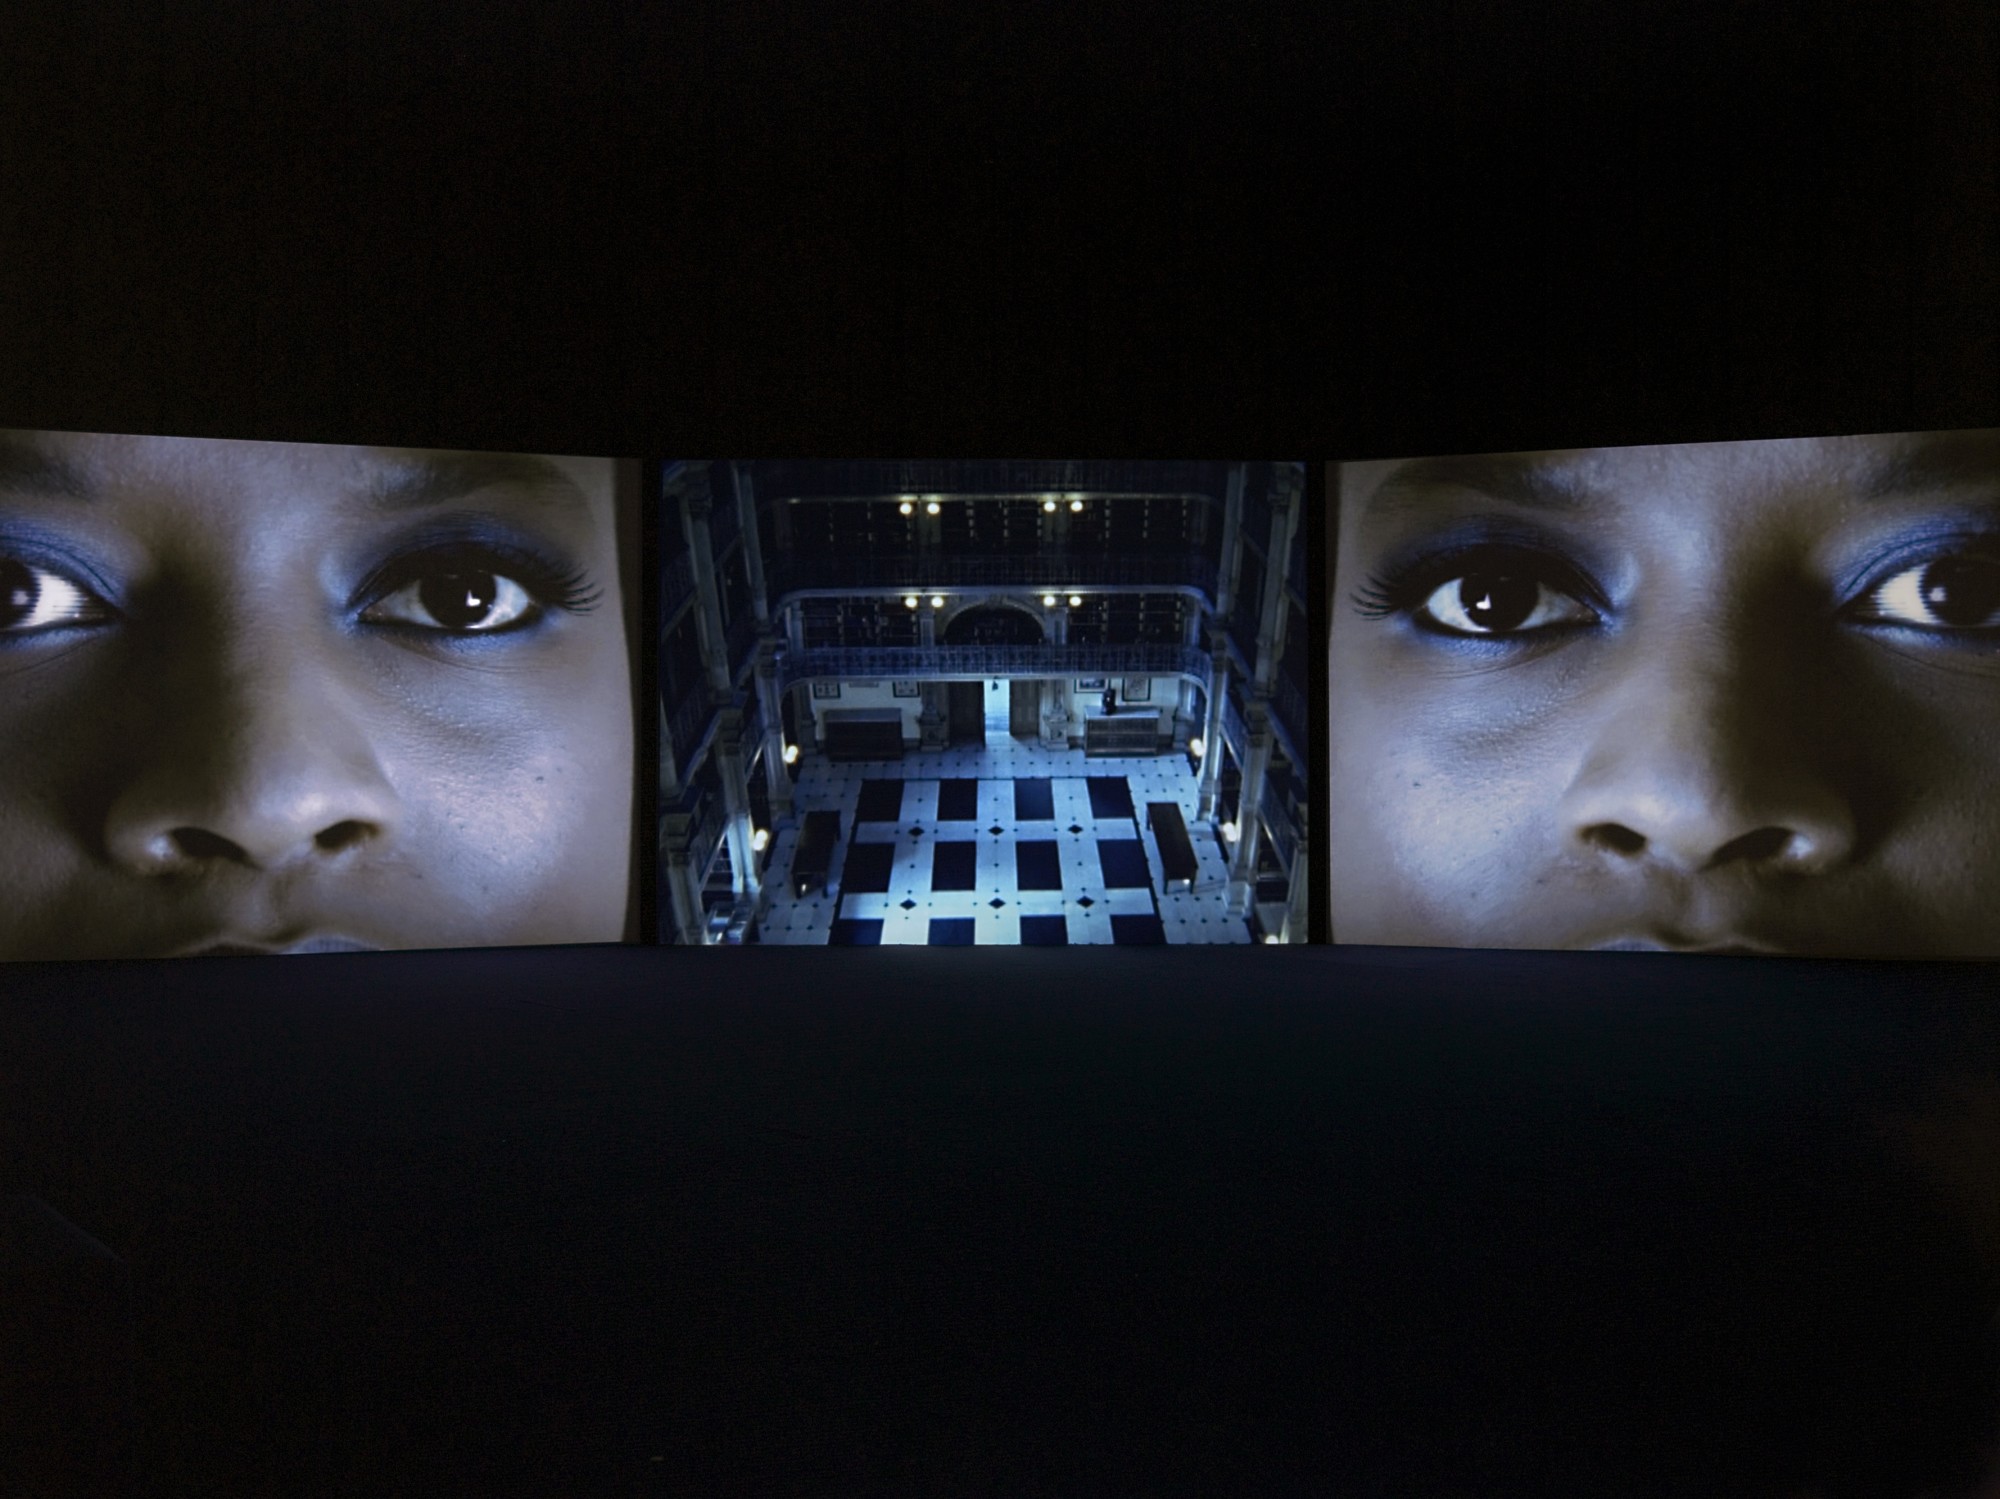 Isaac Julien. Espace 315 - Centre Georges Pompidou, Paris, 2005  11'56", three-screen video installation, 16mm film transferred to DVD, colour, 5.1 sound